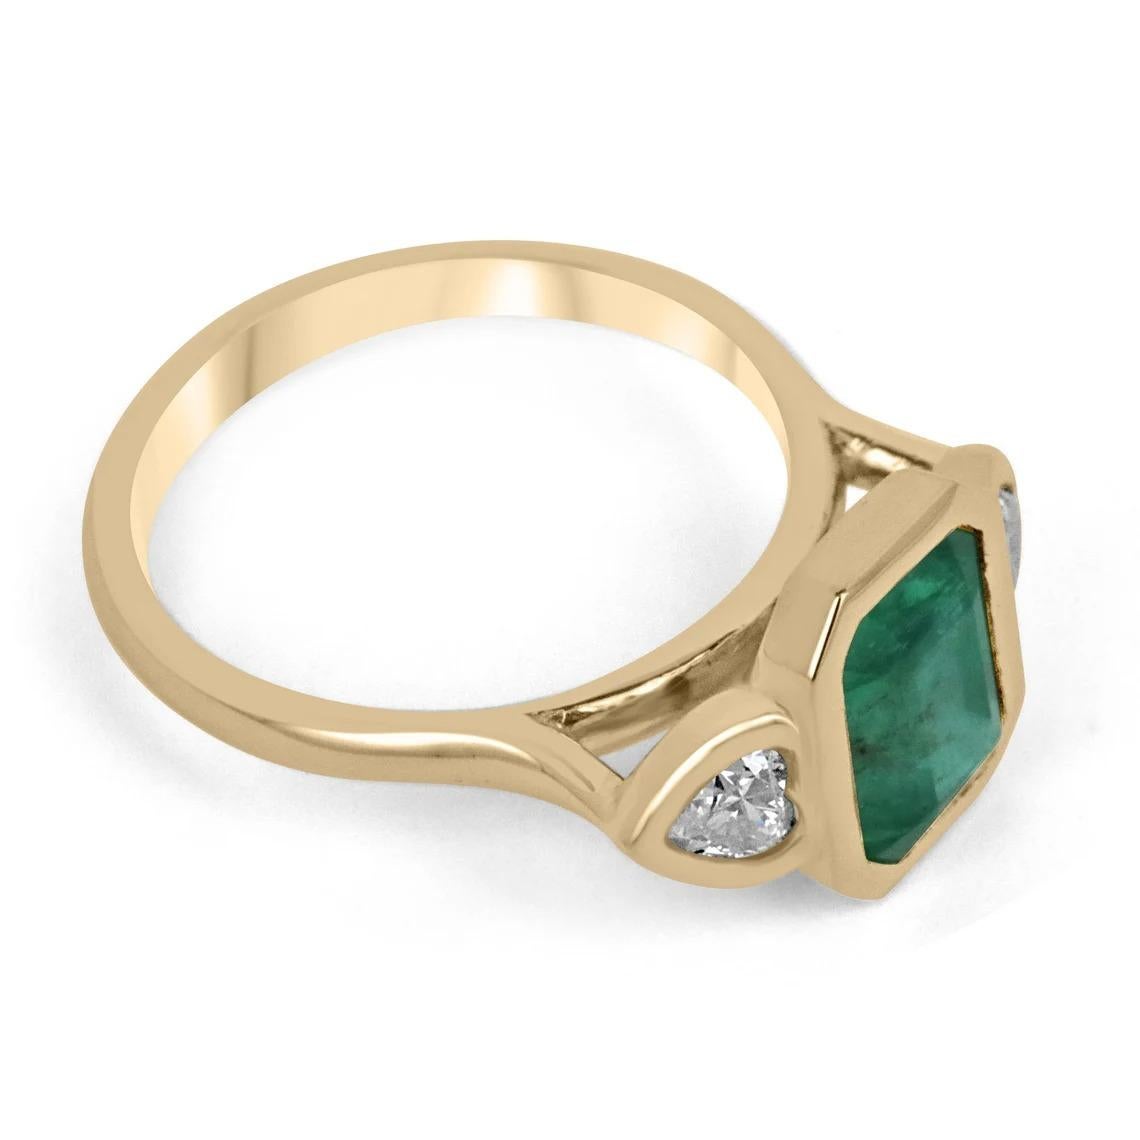 Shower her with love with this emerald and diamond heart cocktail ring. Dexterously handcrafted in gleaming 18K yellow gold, this ring features a 2.57-carat natural emerald, emerald cut. Set in a secure bezel setting for extra protection. This